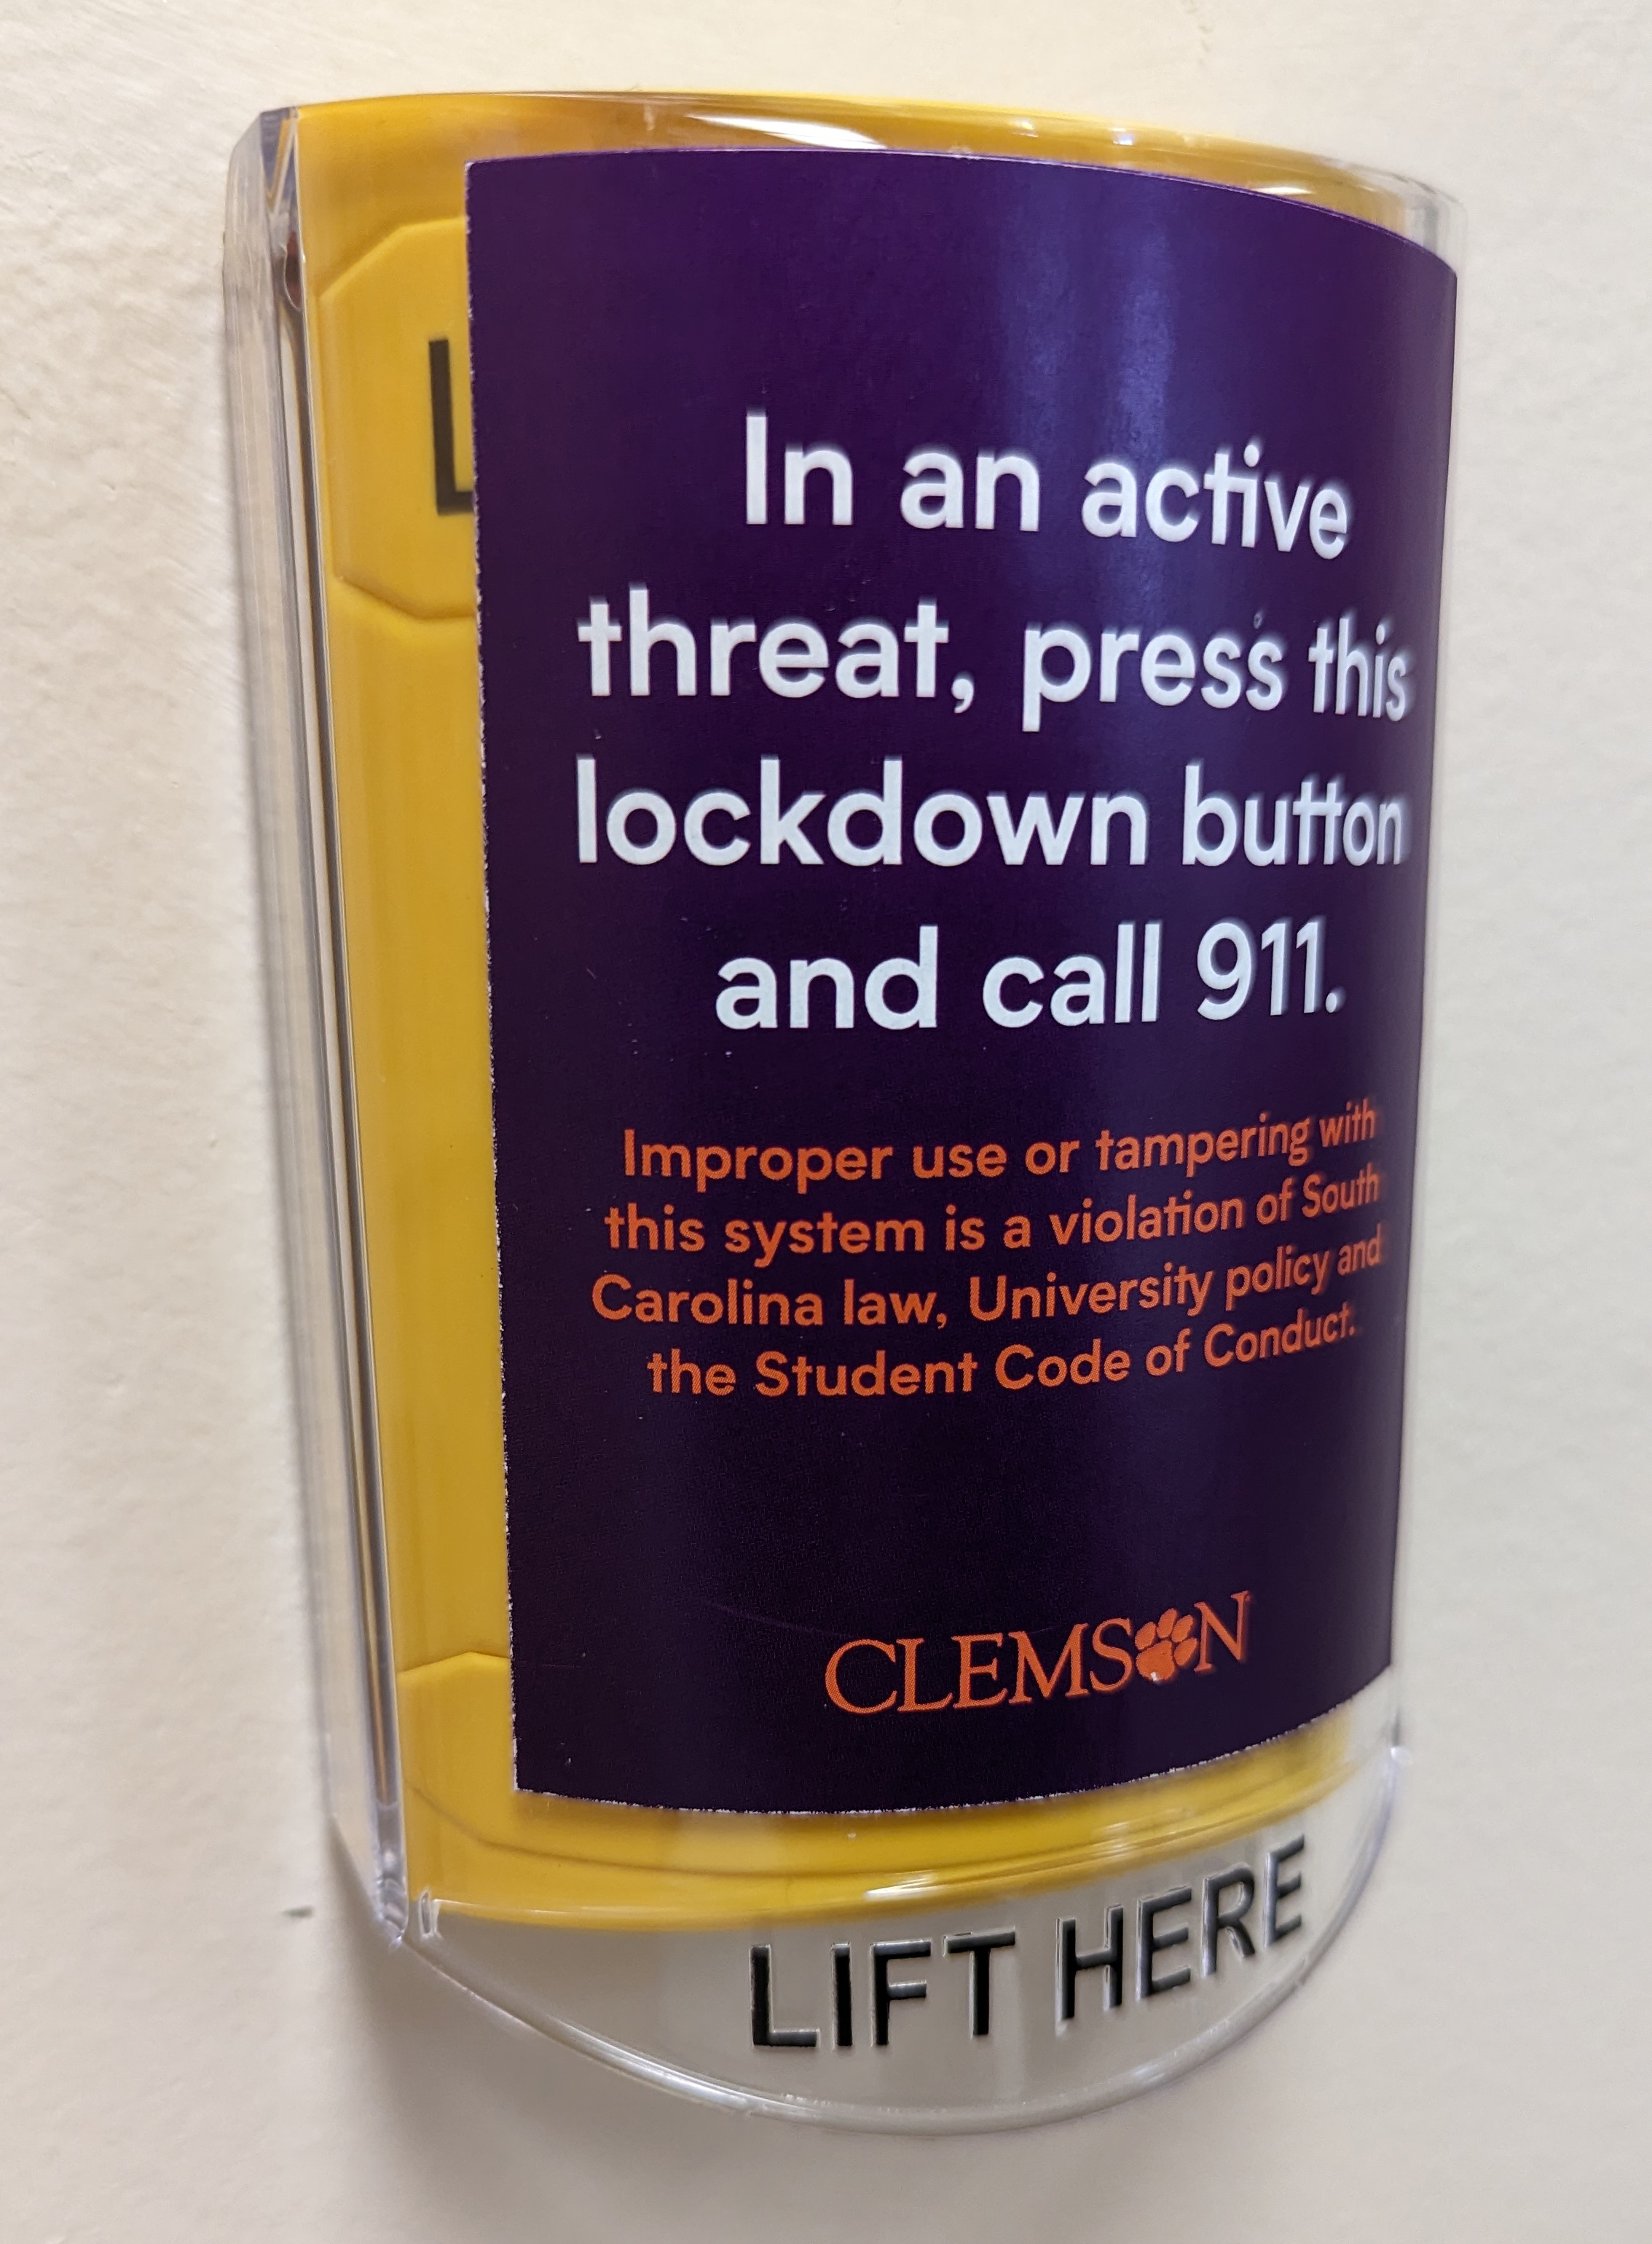 A lockdown button in a classroom in one of the buildings on the Clemson campus.